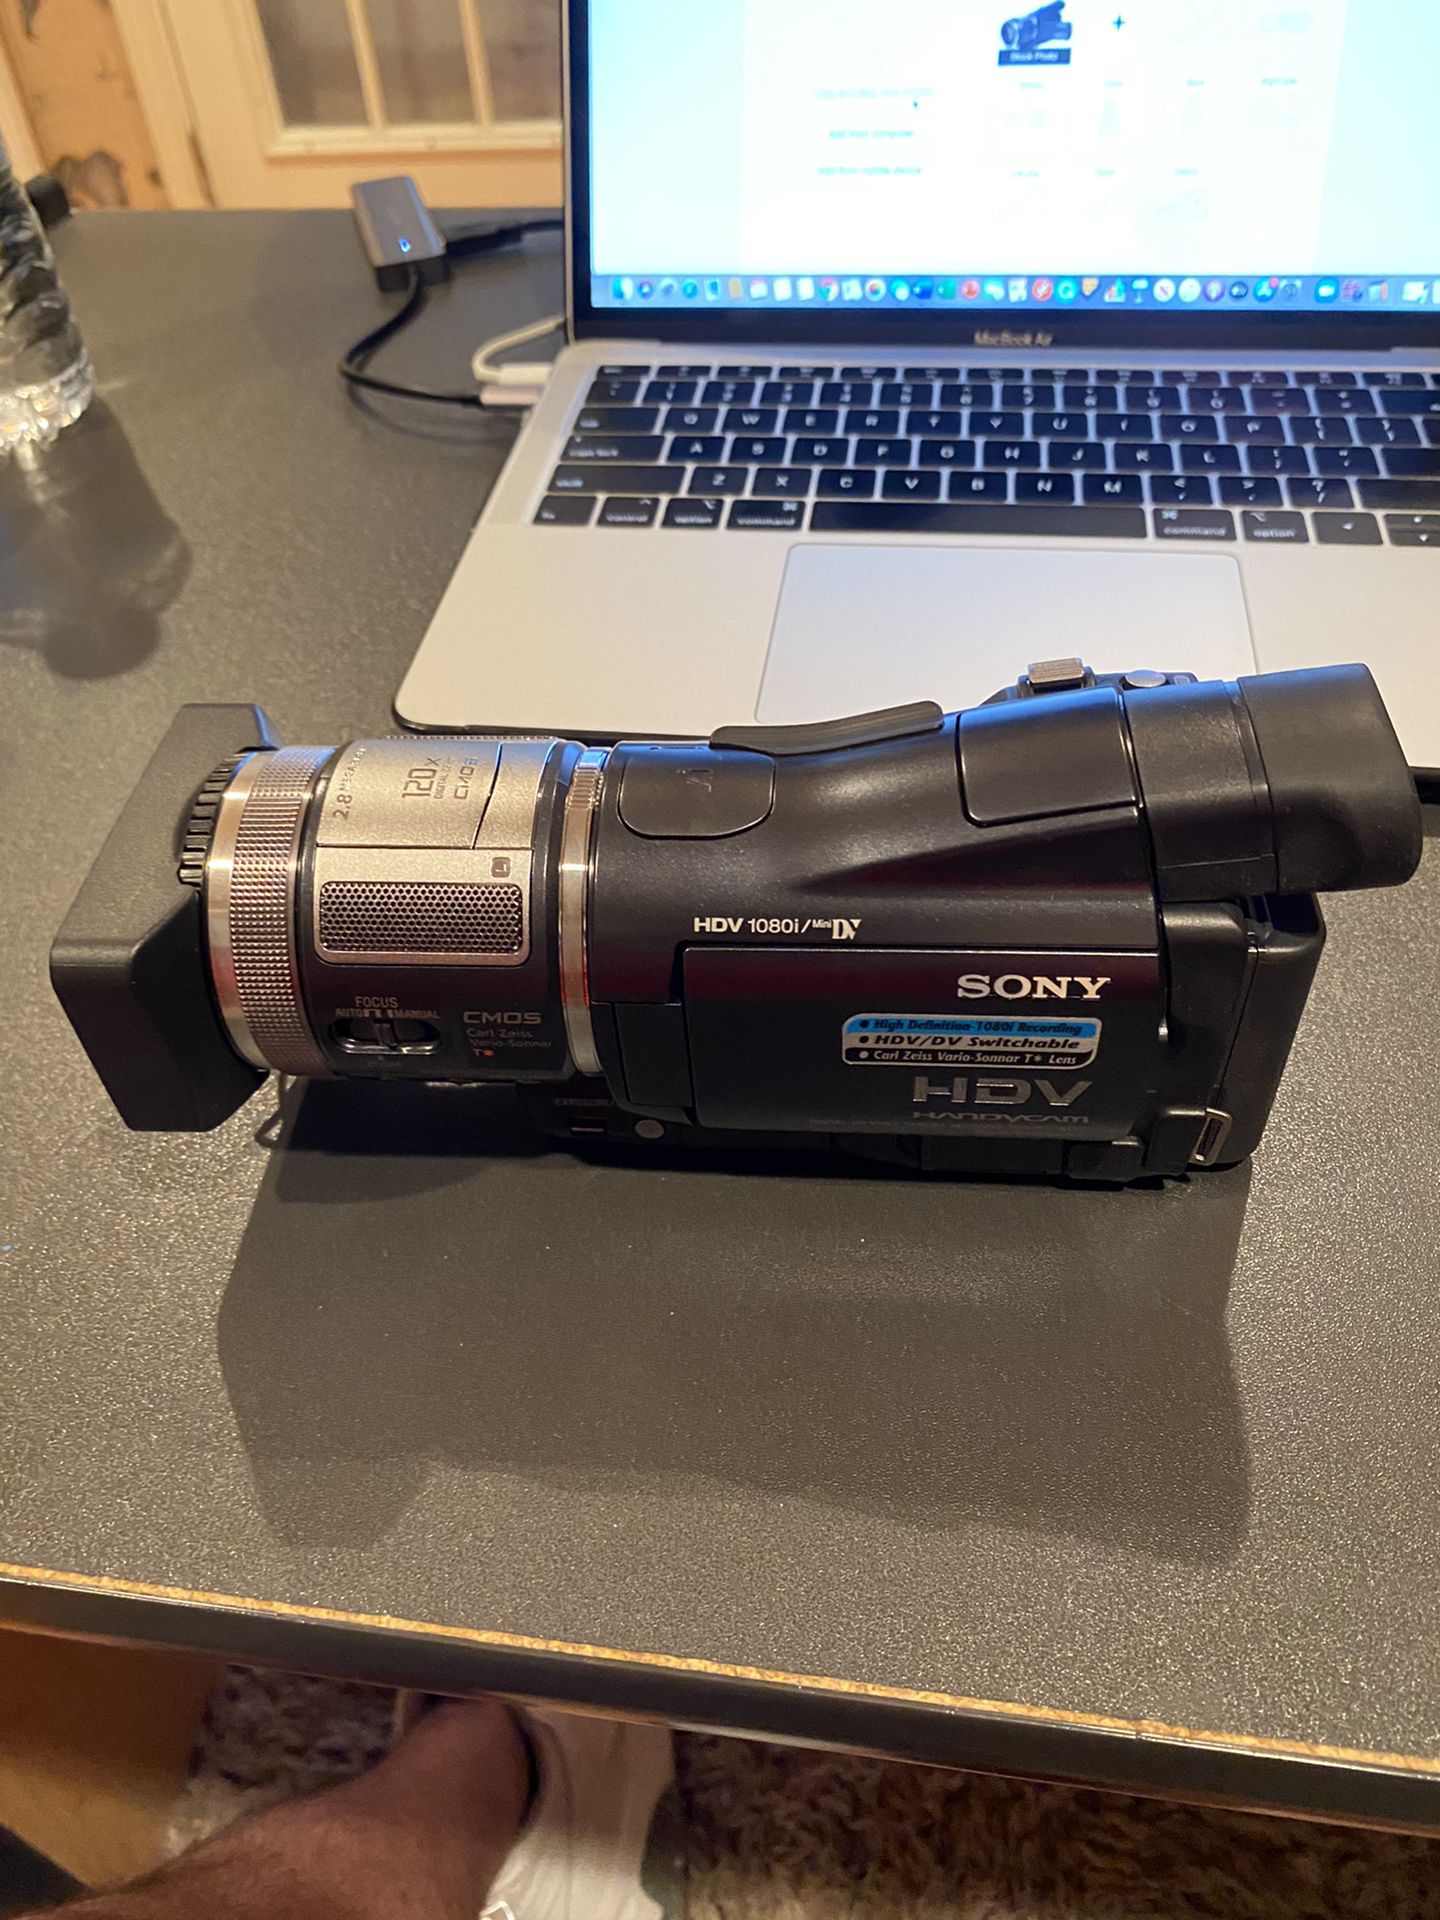 Sony HDV video camera with extra lens and case